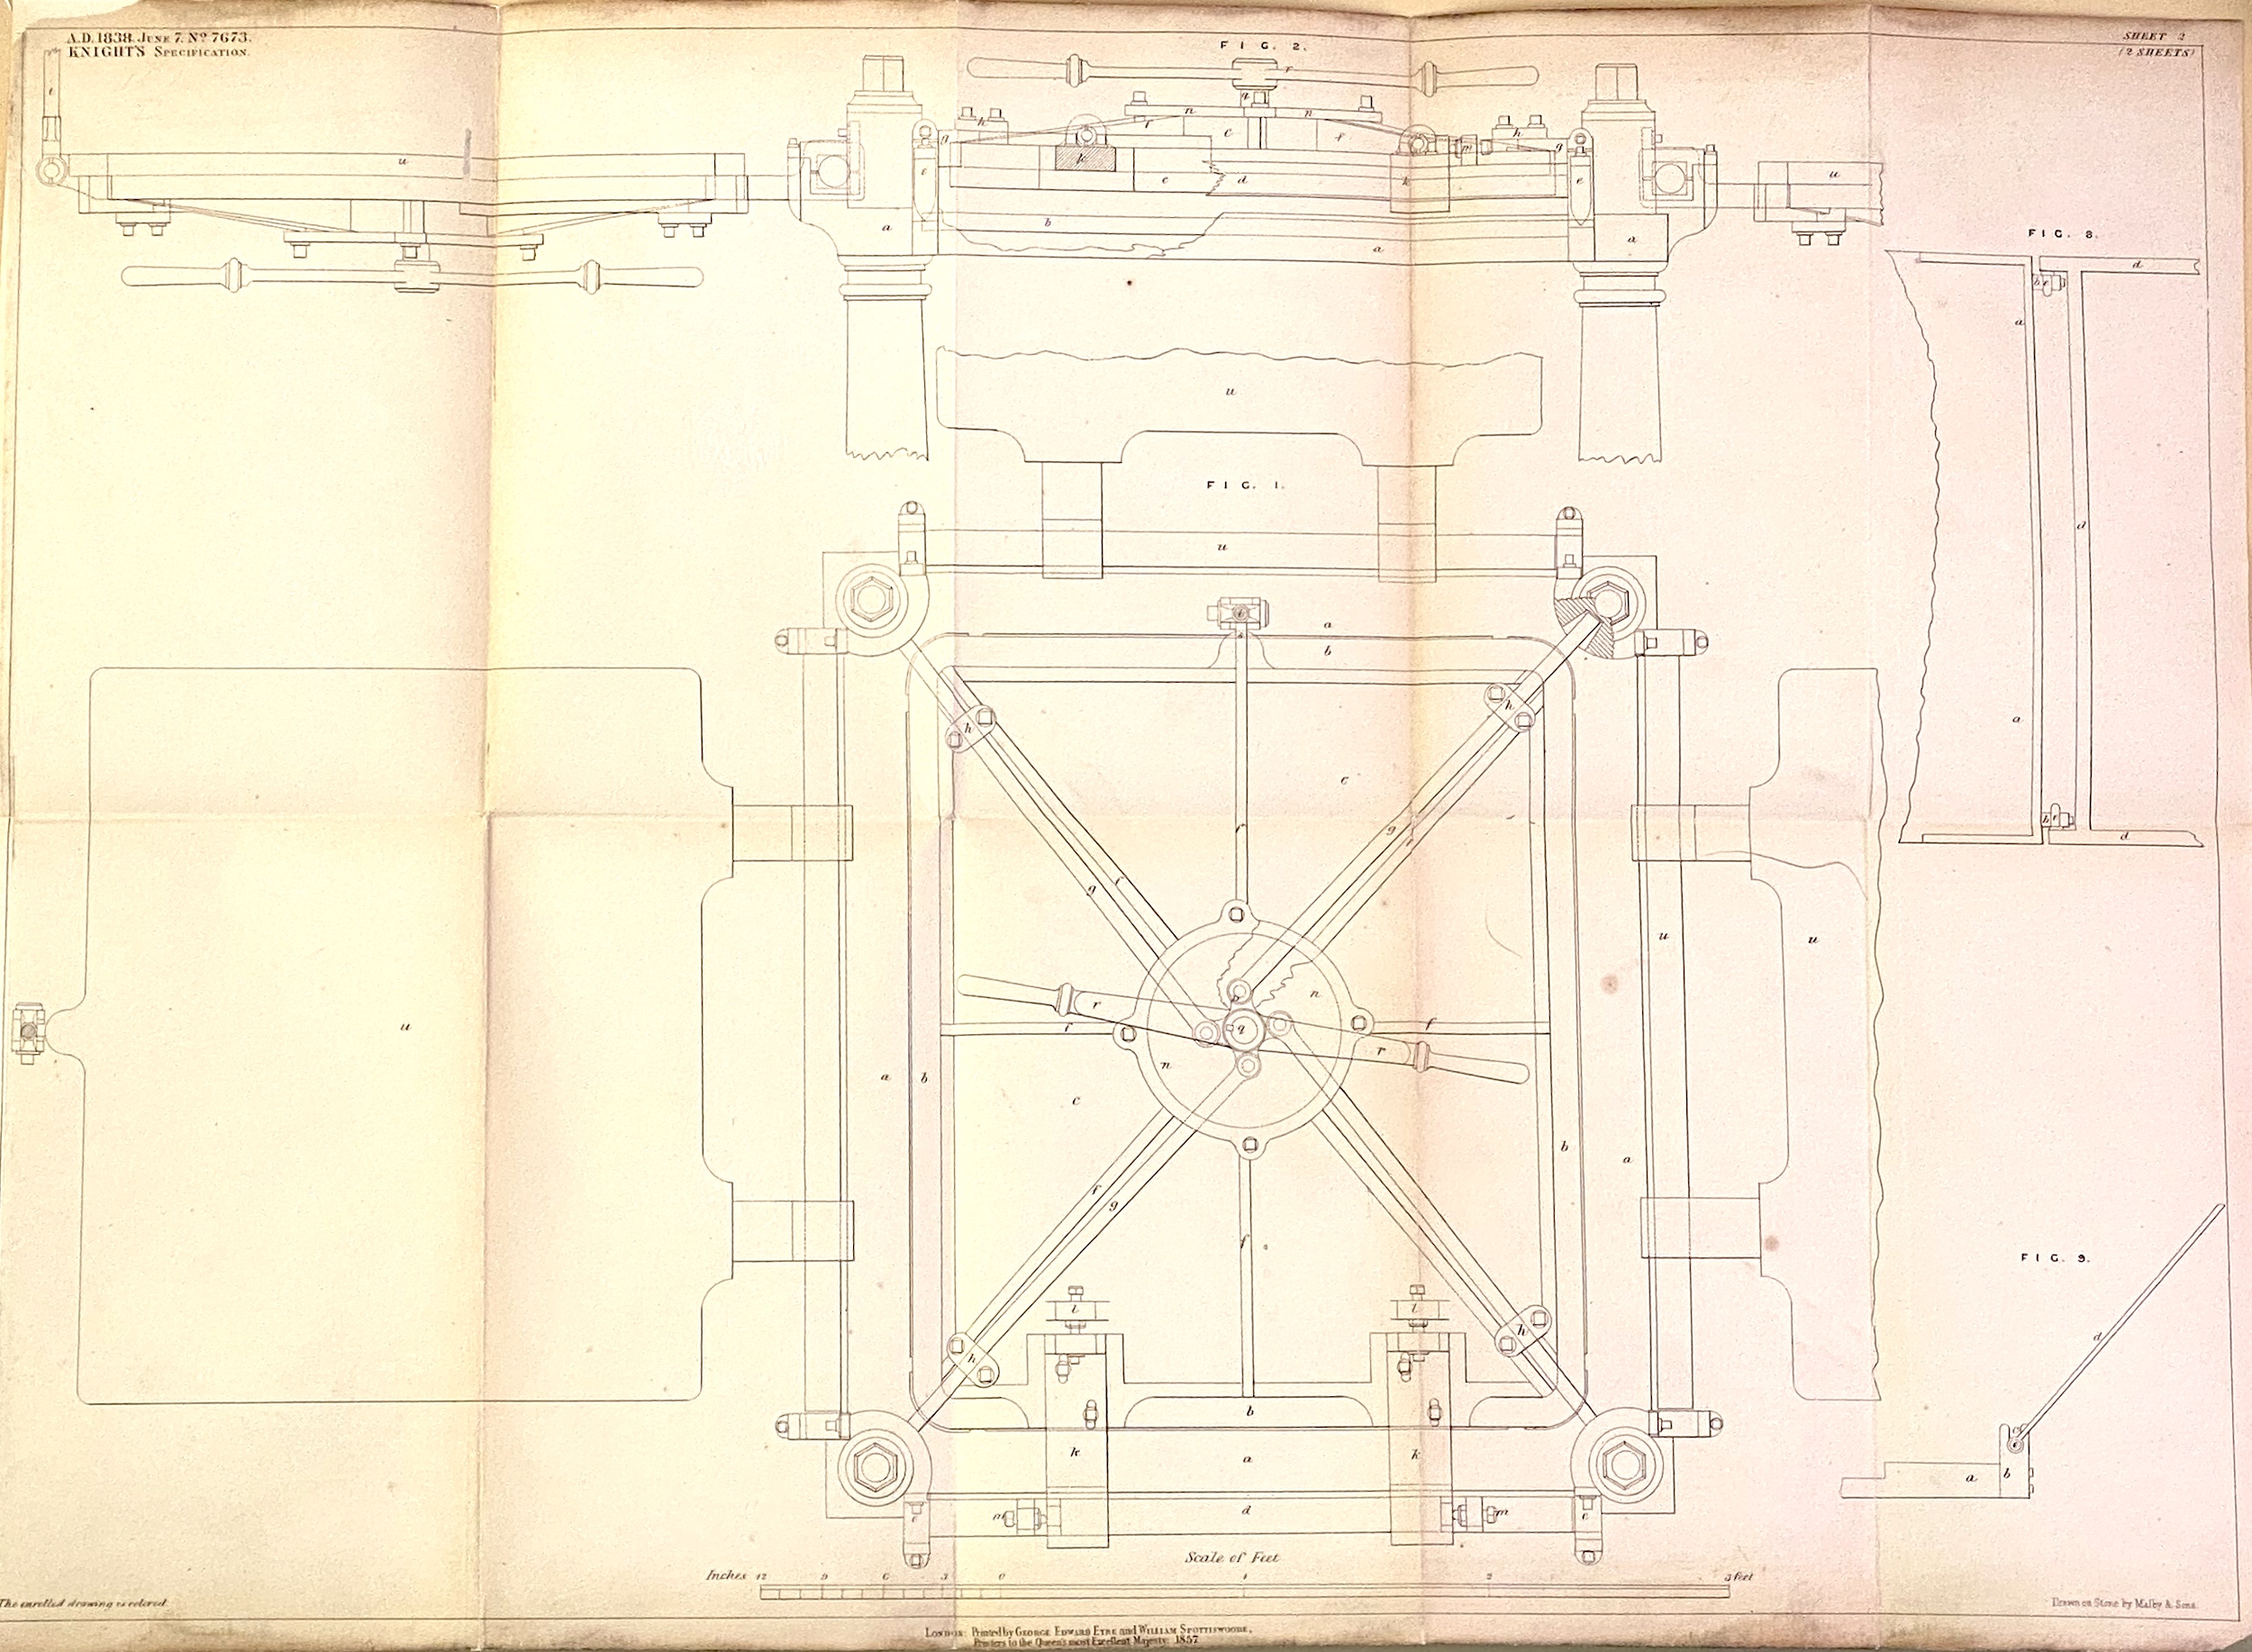 Knight's first patent drawing illustrating his color printing patent.